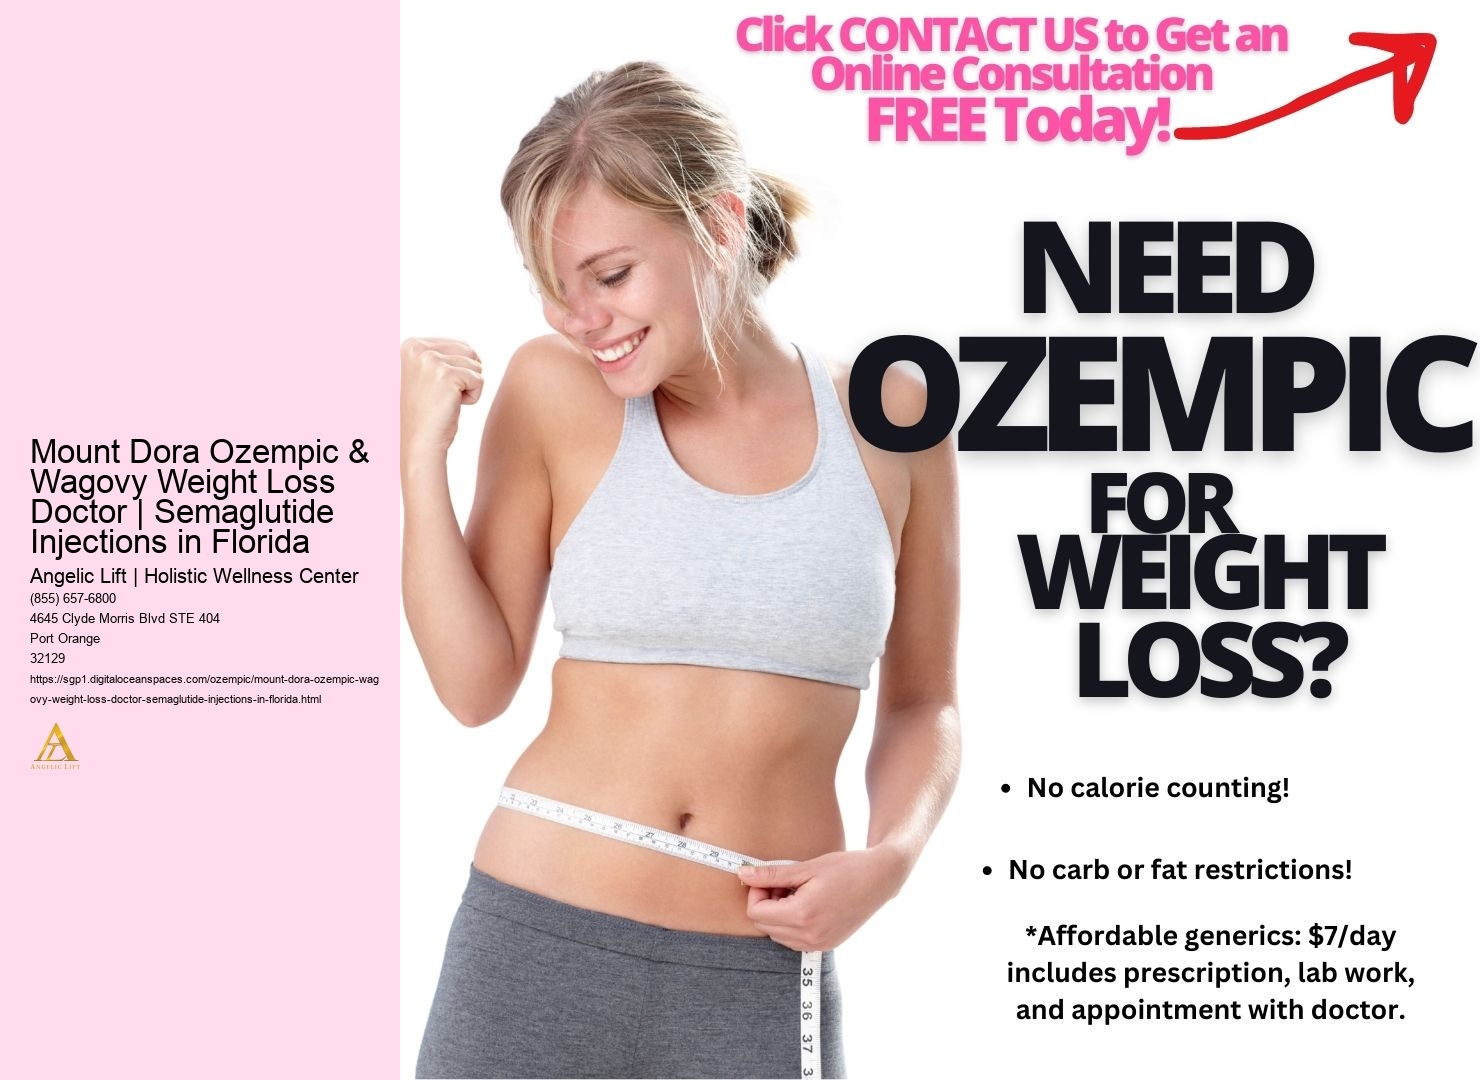 Mount Dora Ozempic & Wagovy Weight Loss Doctor | Semaglutide Injections in Florida